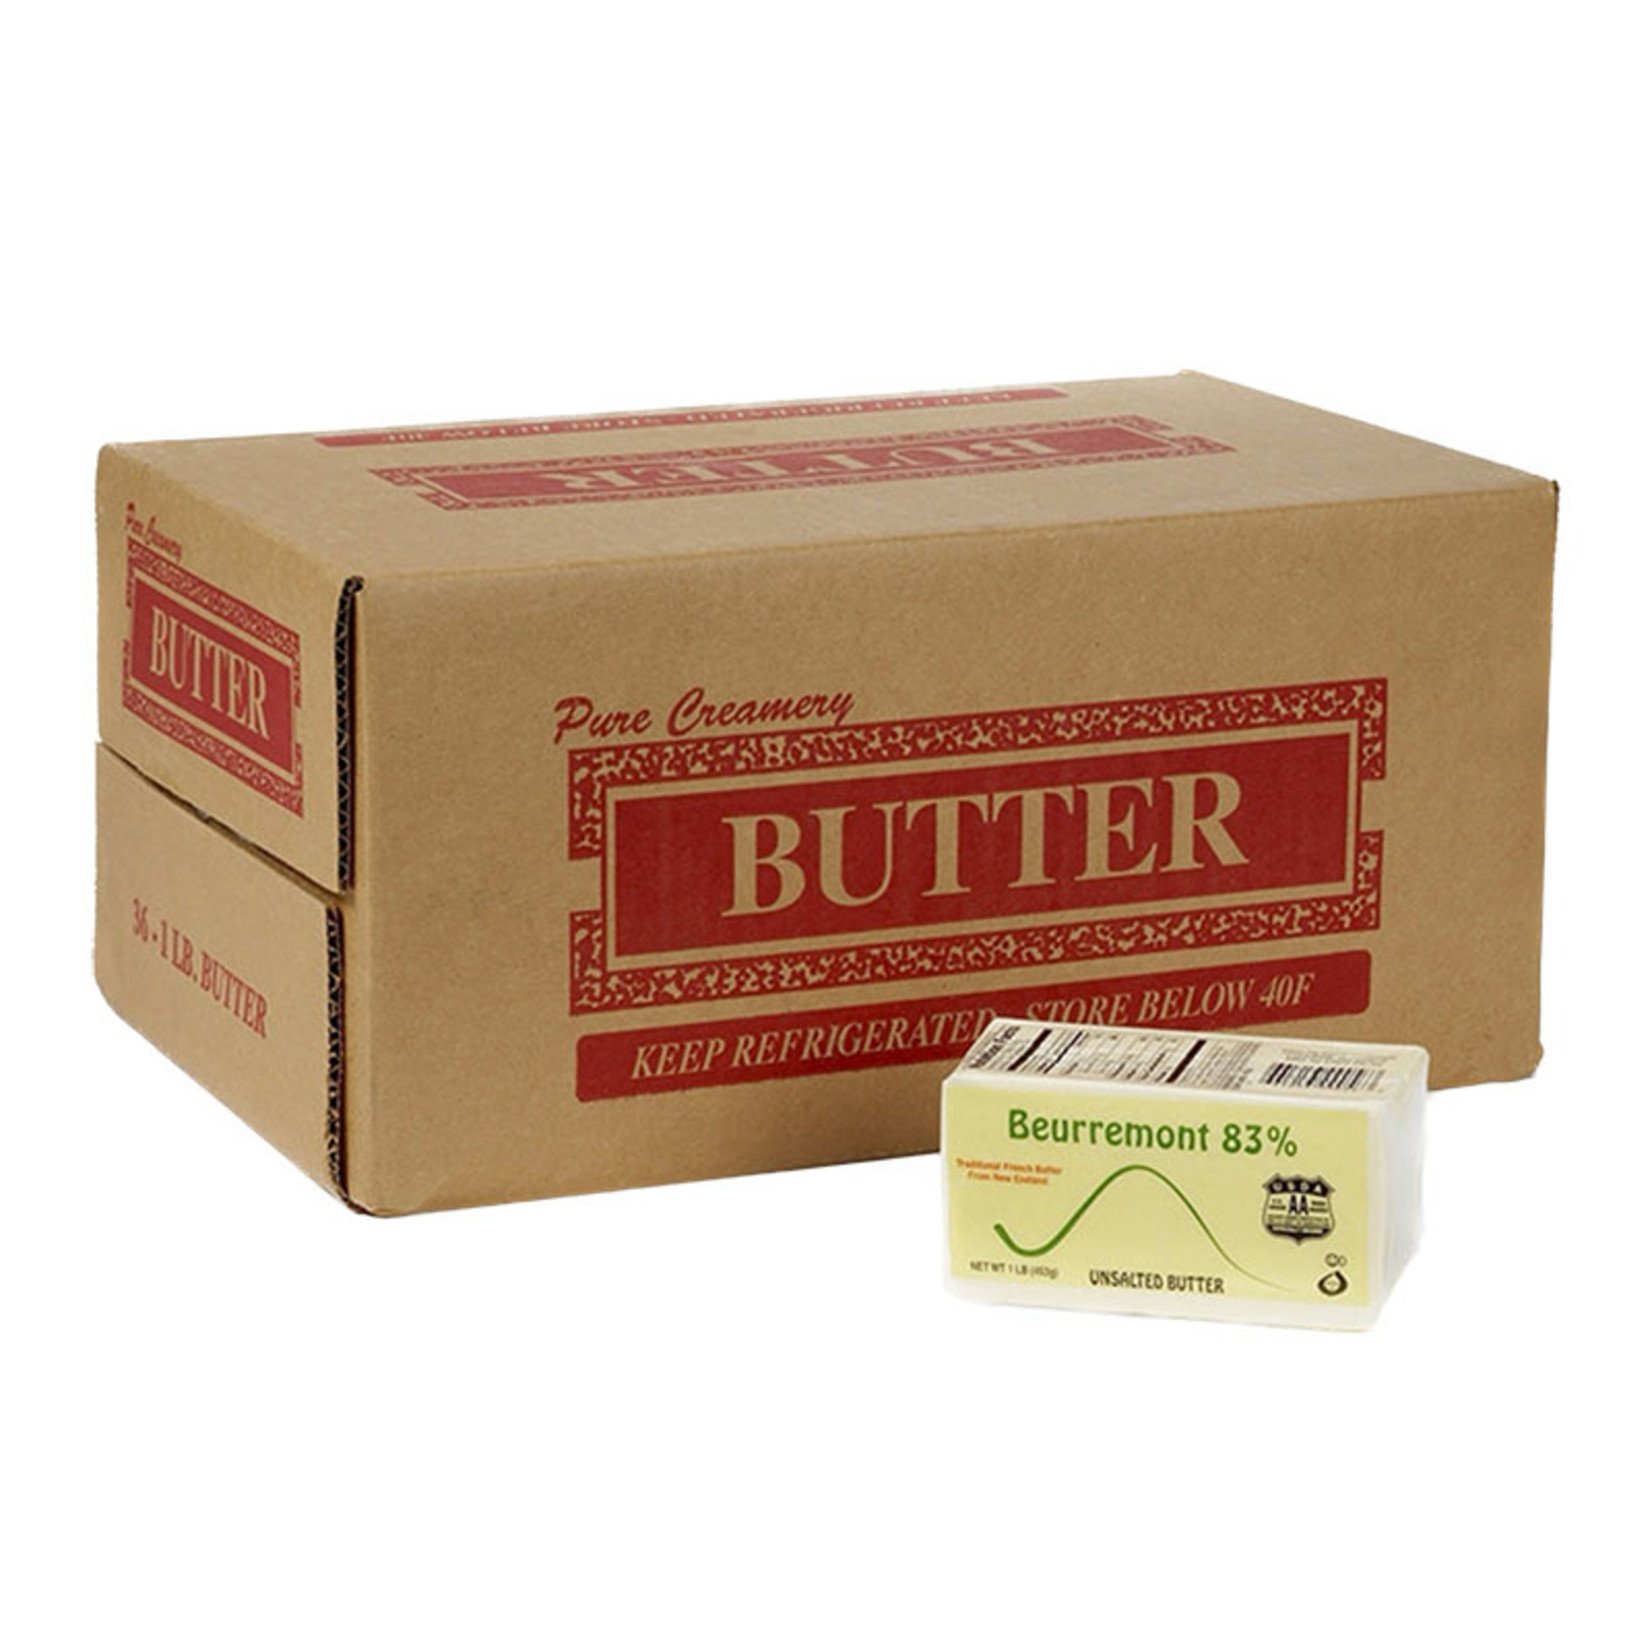 Beurremont Beurremont - 83% Unsalted Butter - 1 lb (box of 36)